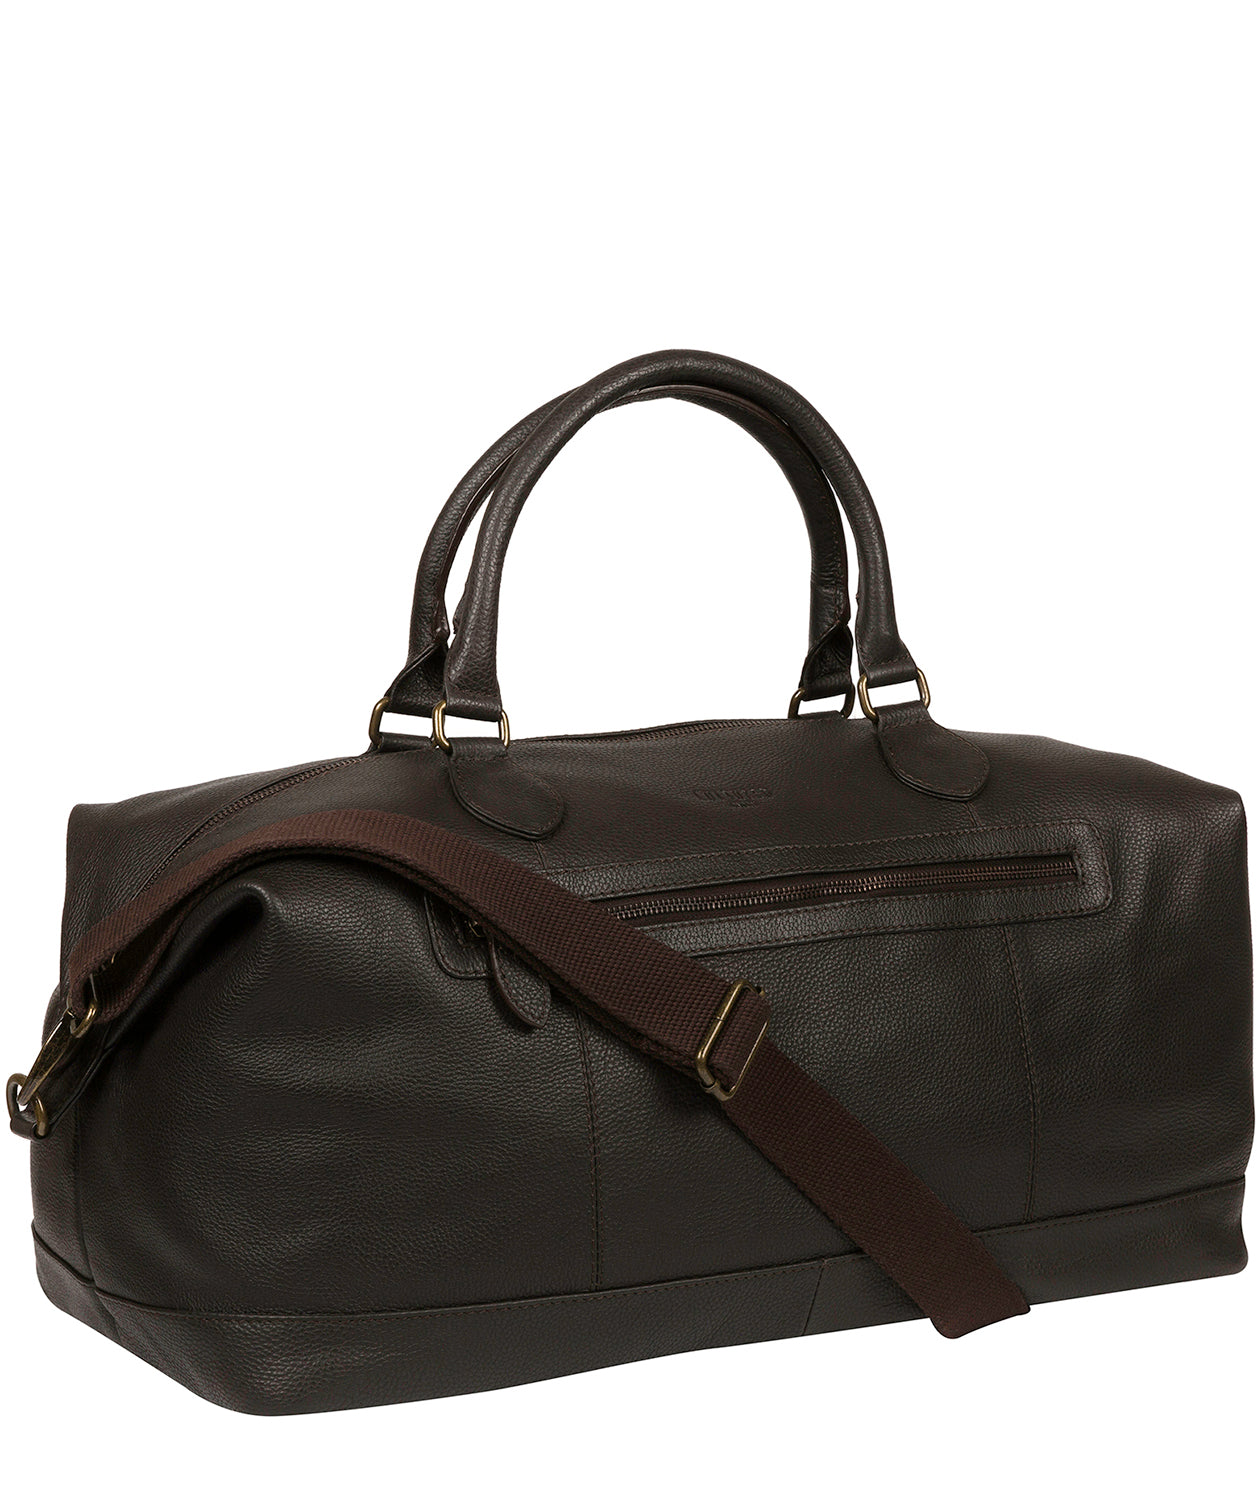 'Harbour' Brown Leather Holdall image 5